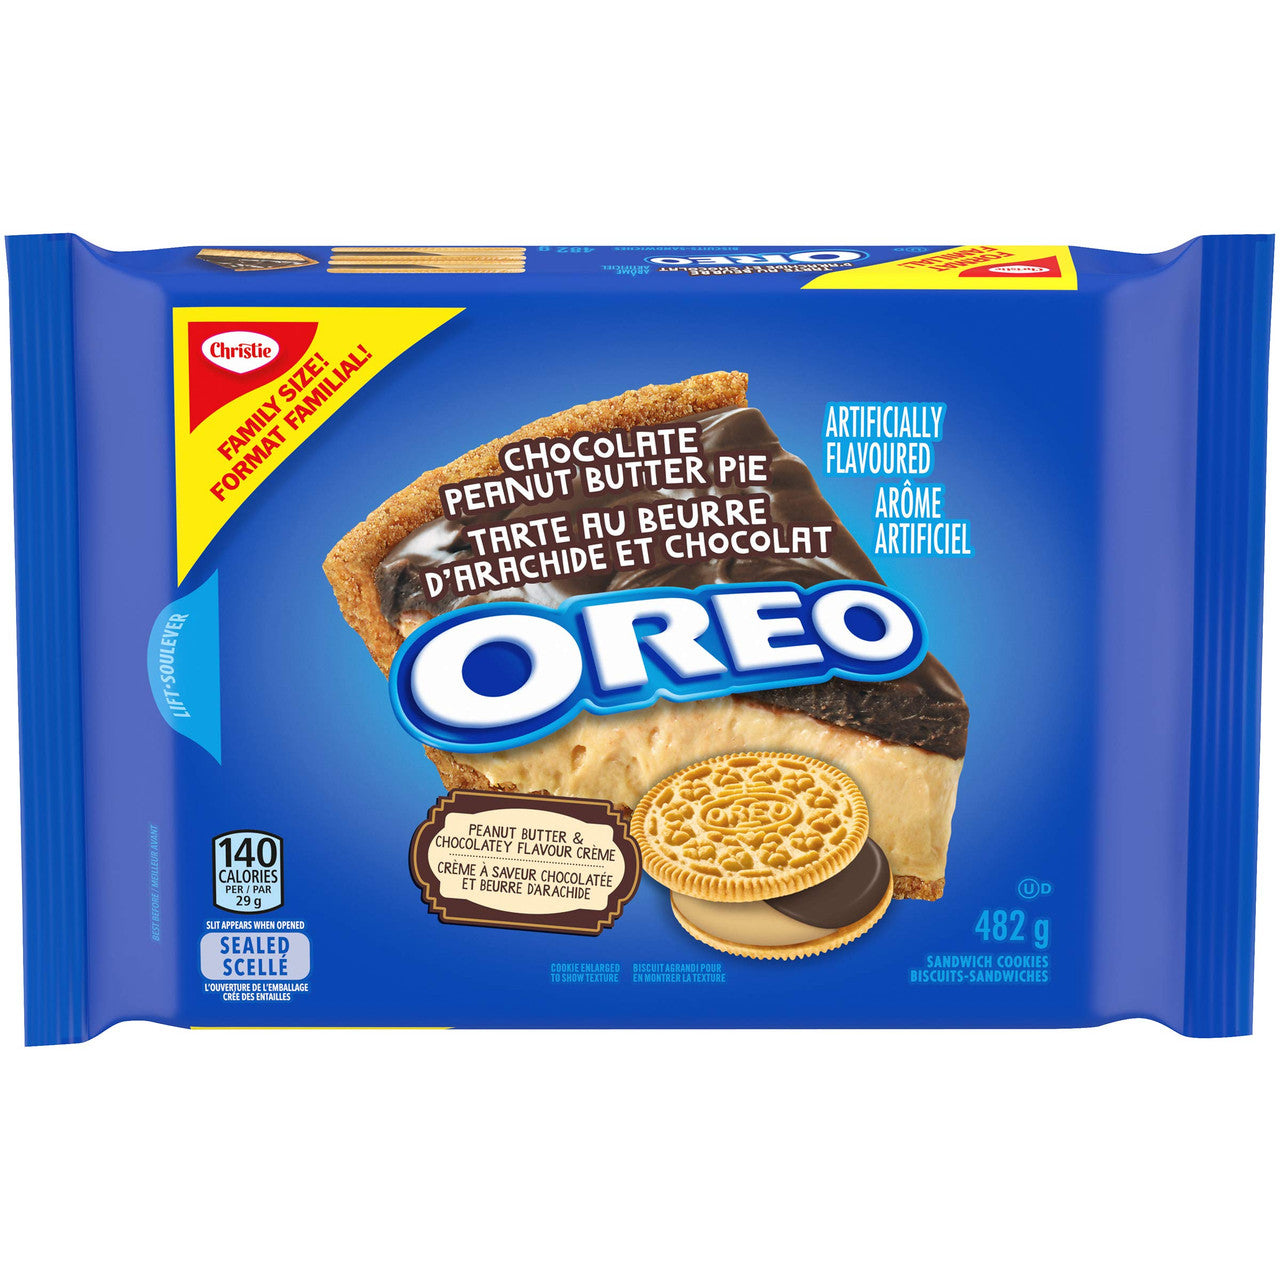 Christie Oreo Cookies Chocolate Peanut Butter Pie, Family Size Bag, 482g/17 oz., (Imported from Canada)